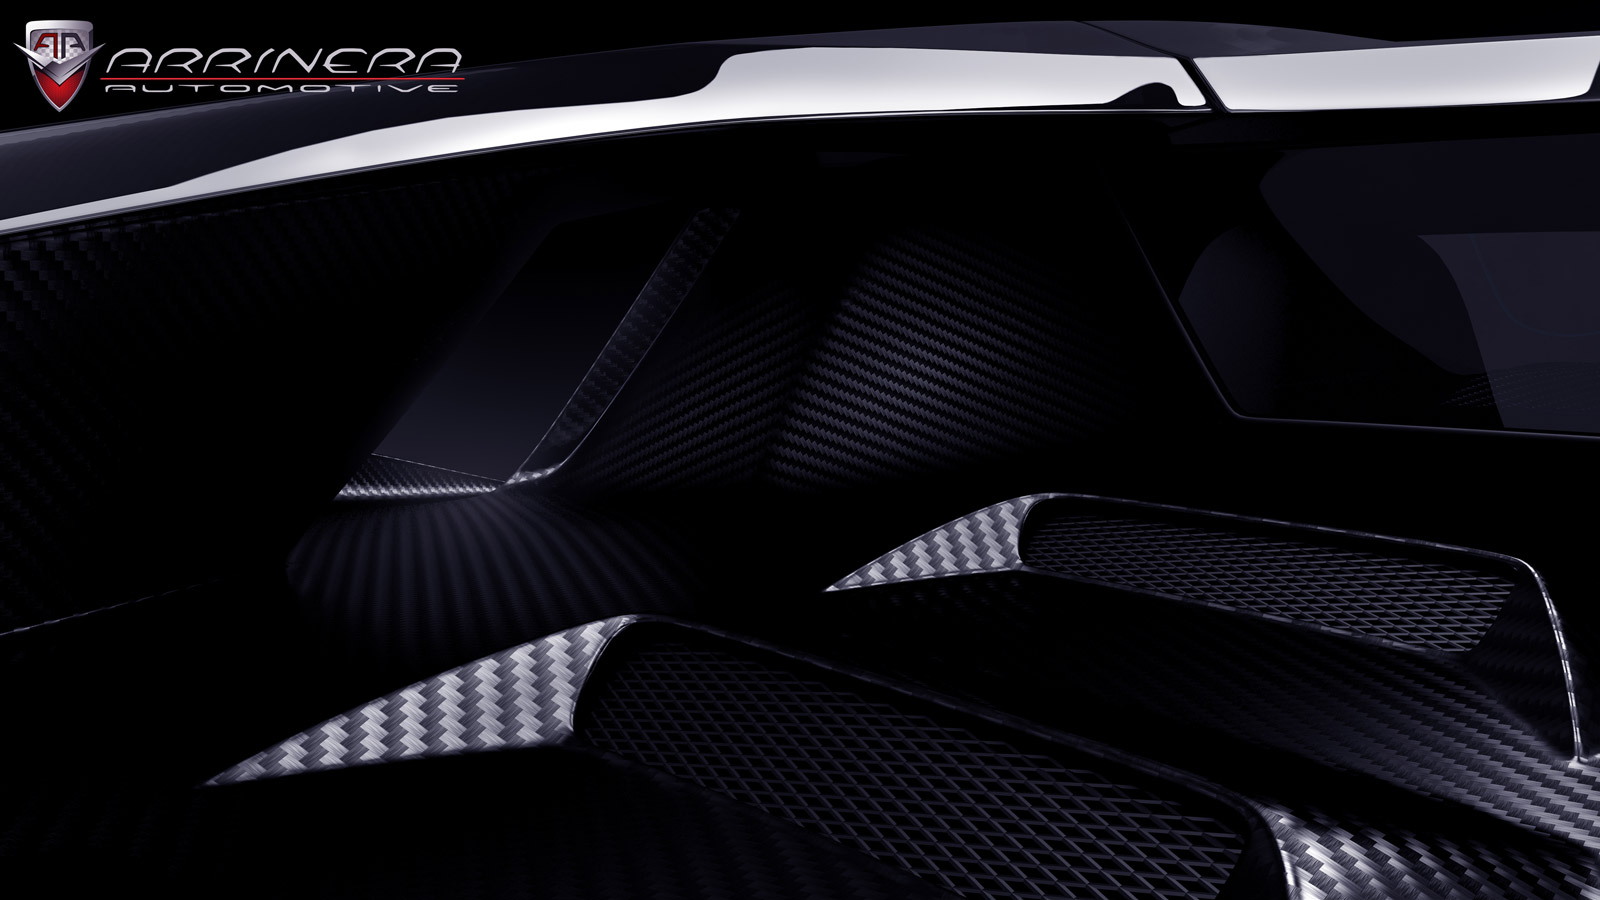 Arrinera Automotive teases a redesign for its supercar project 